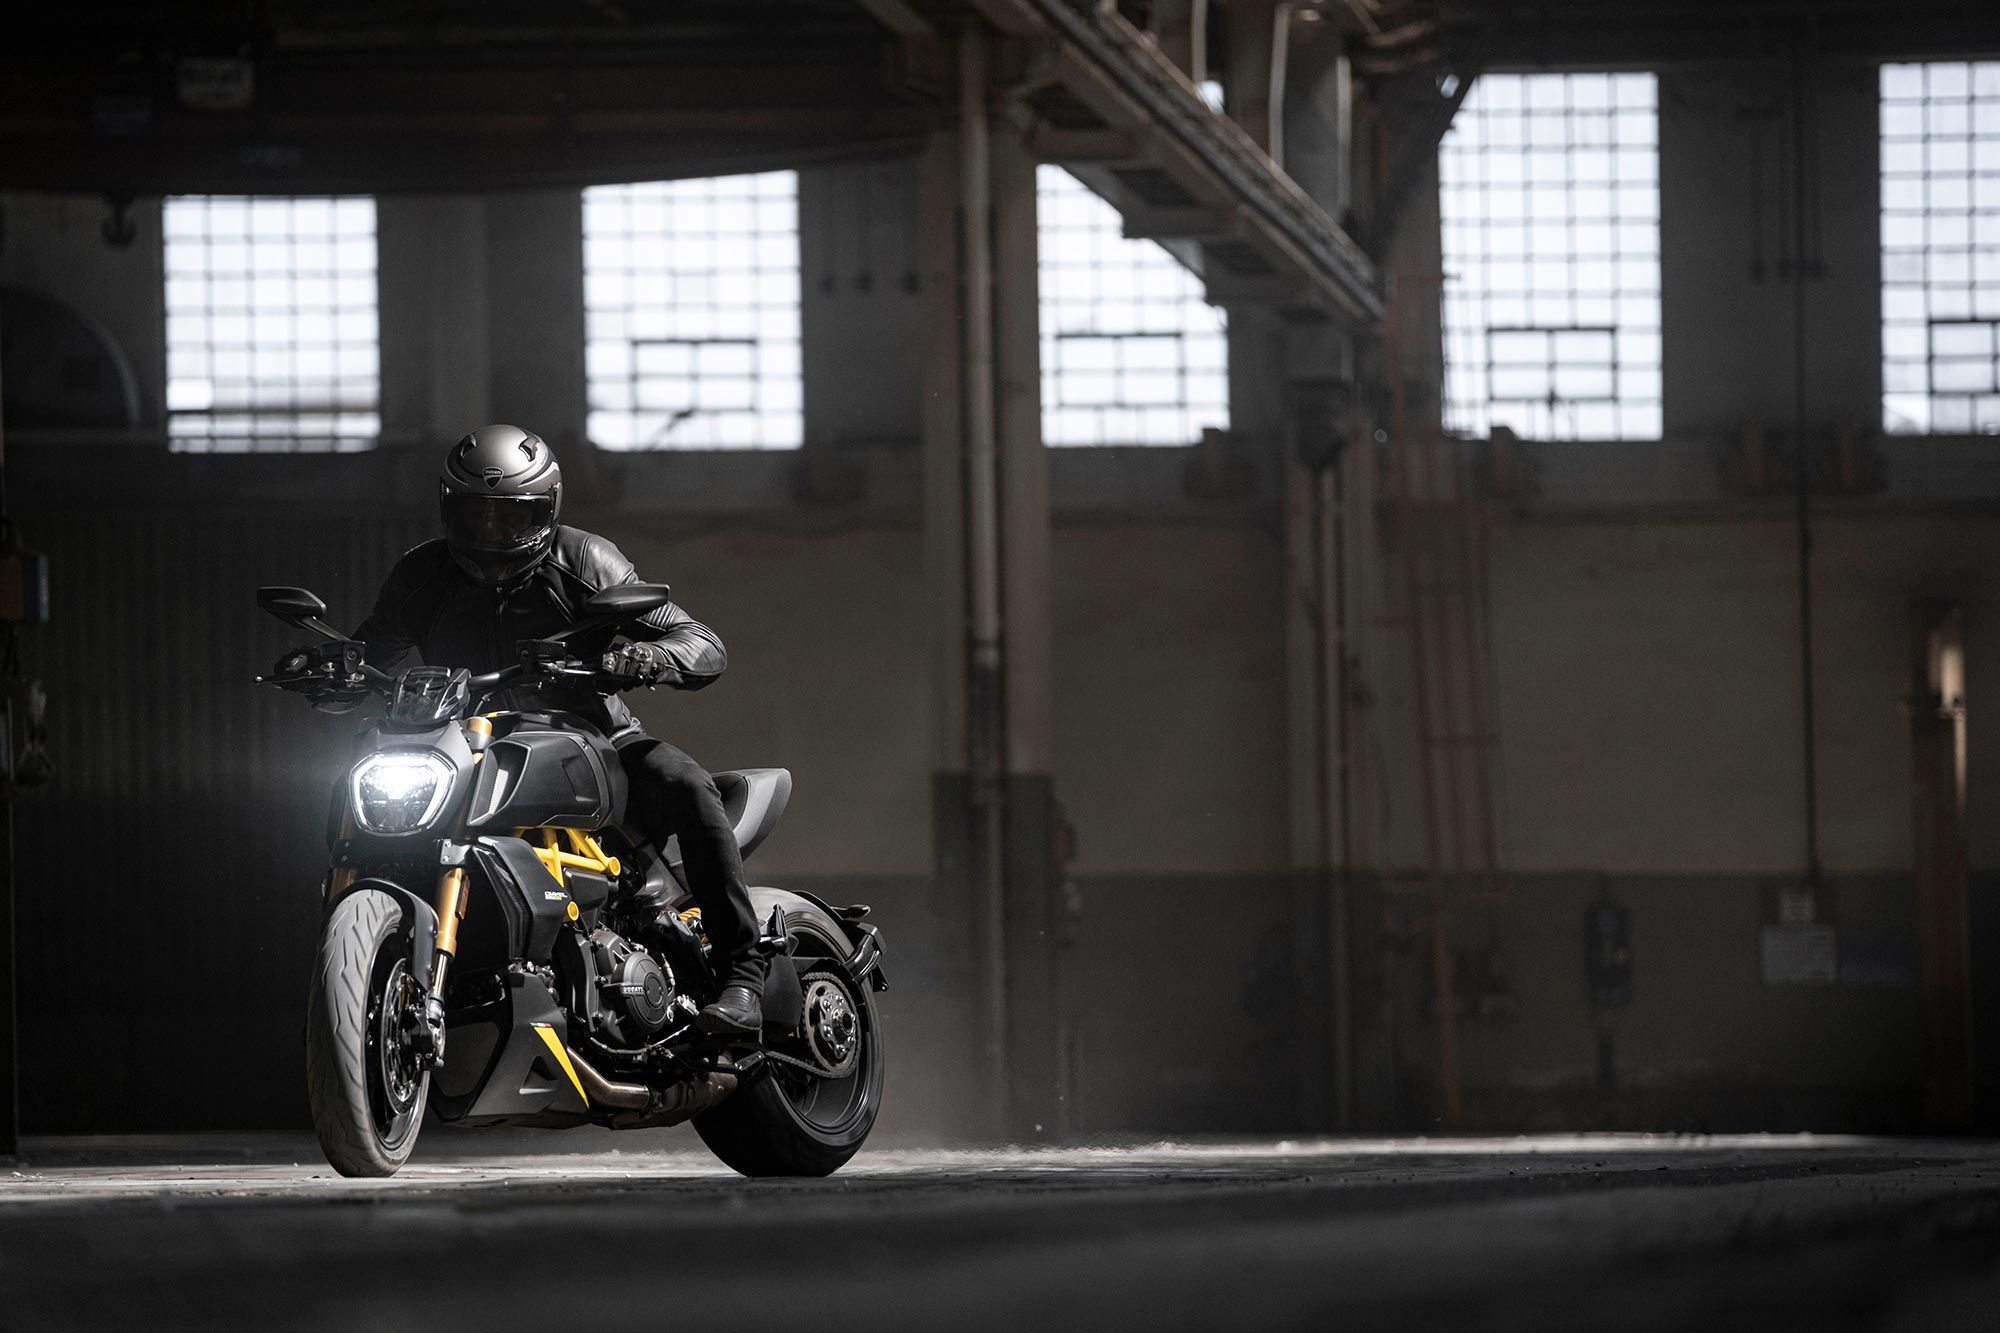 Ducati keeps its power cruiser as stylish as ever with the Black and Steel.